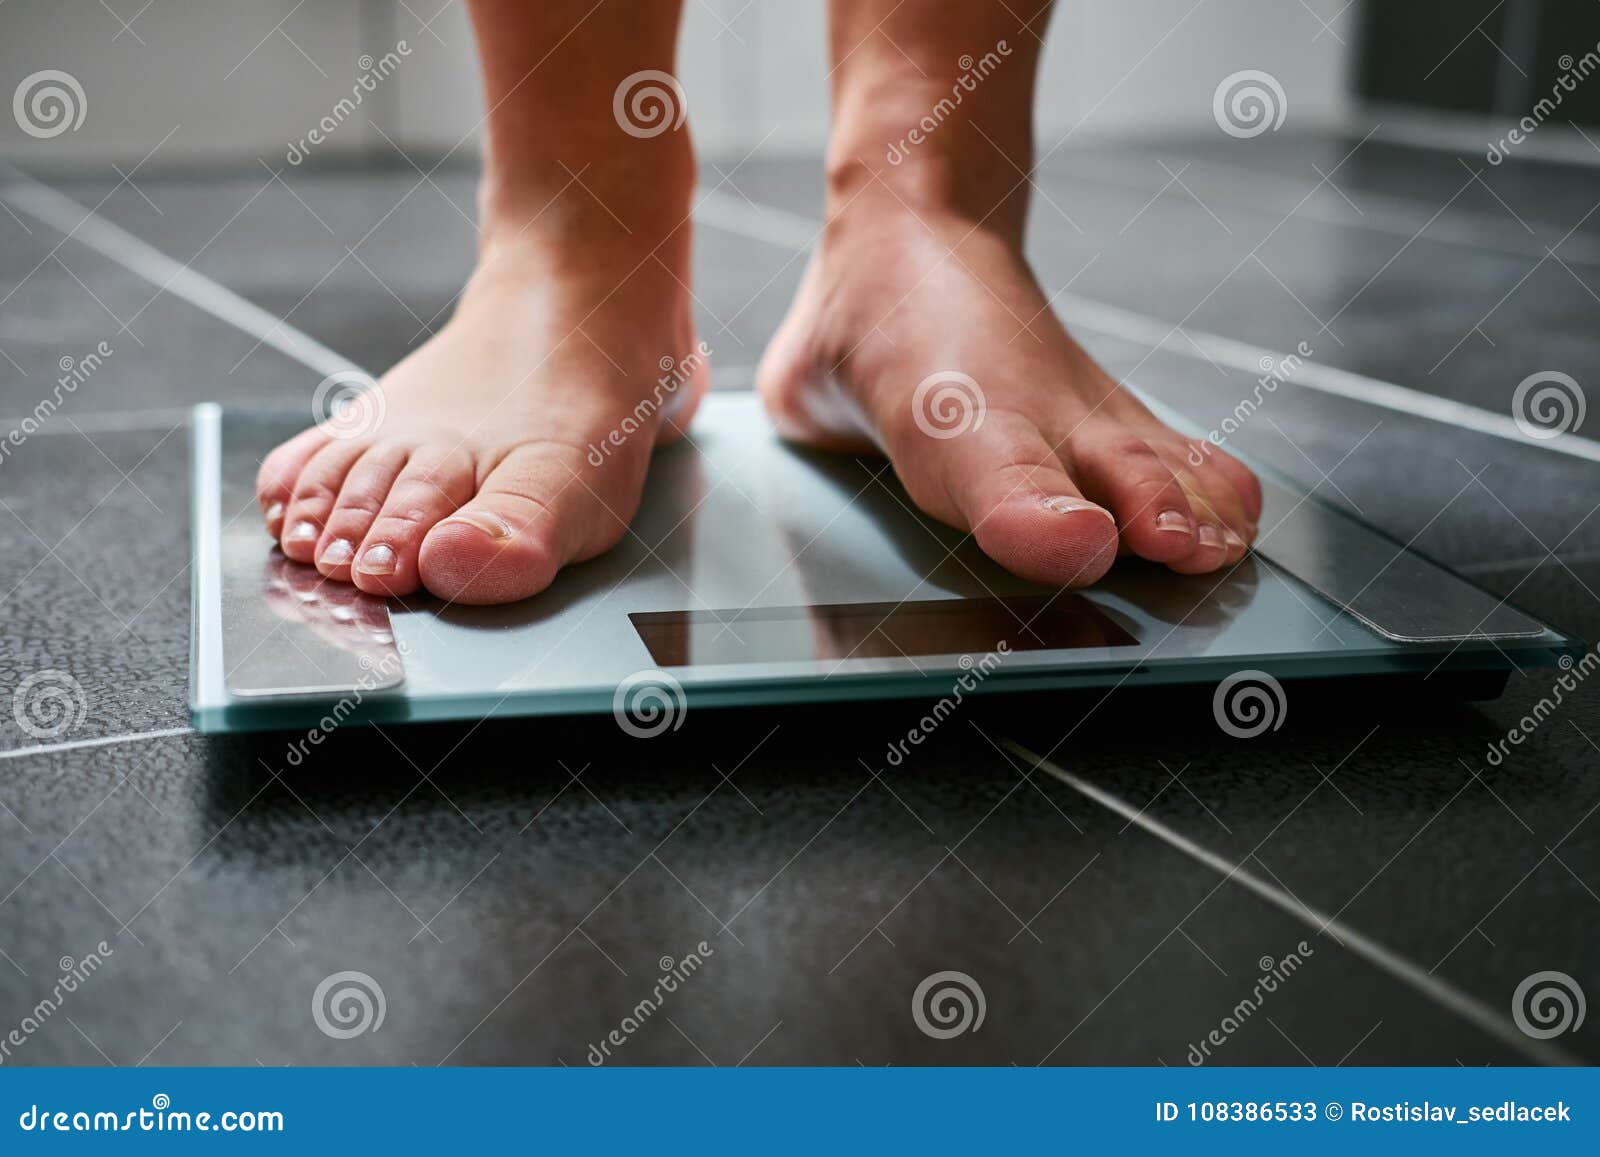 The Feet Of A Woman Standing On Bathroom Scales To Turn Stock Photo,  Picture and Royalty Free Image. Image 11153927.